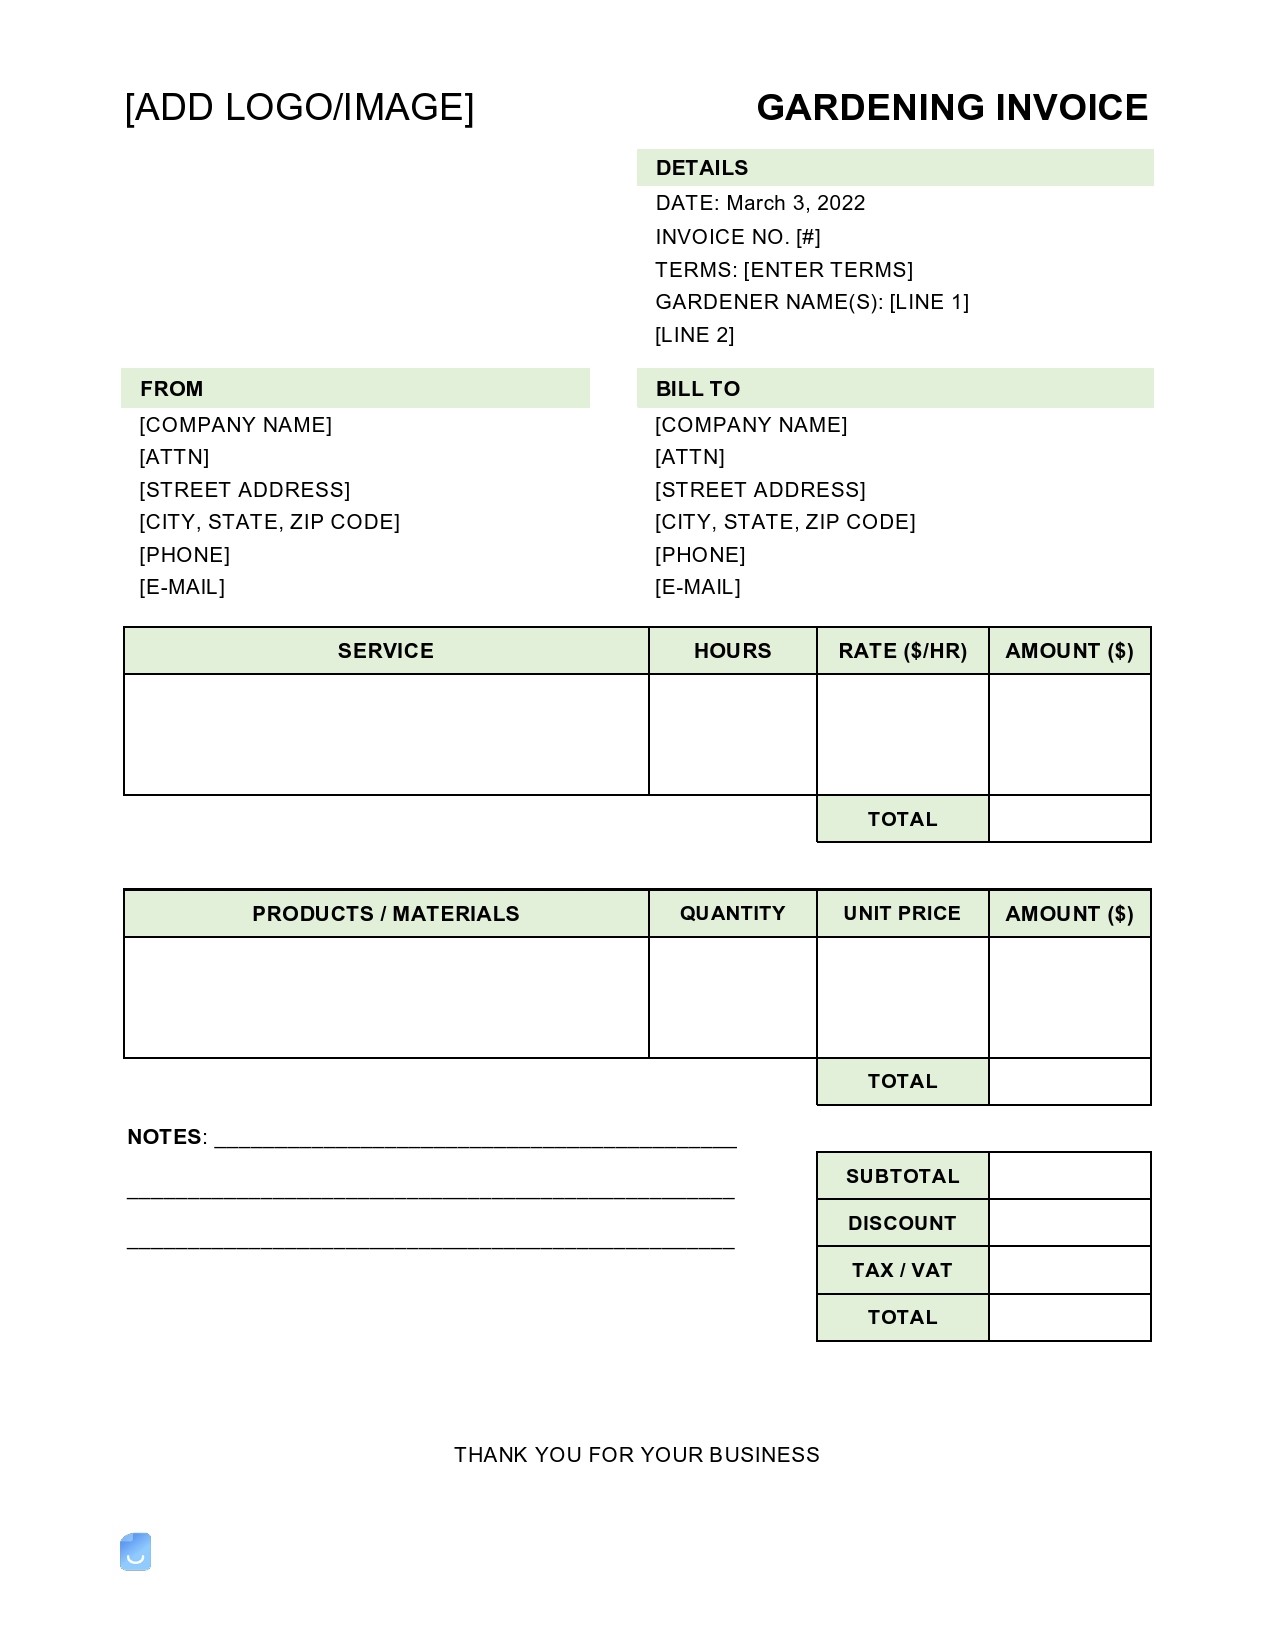 Free landscaping invoice 23